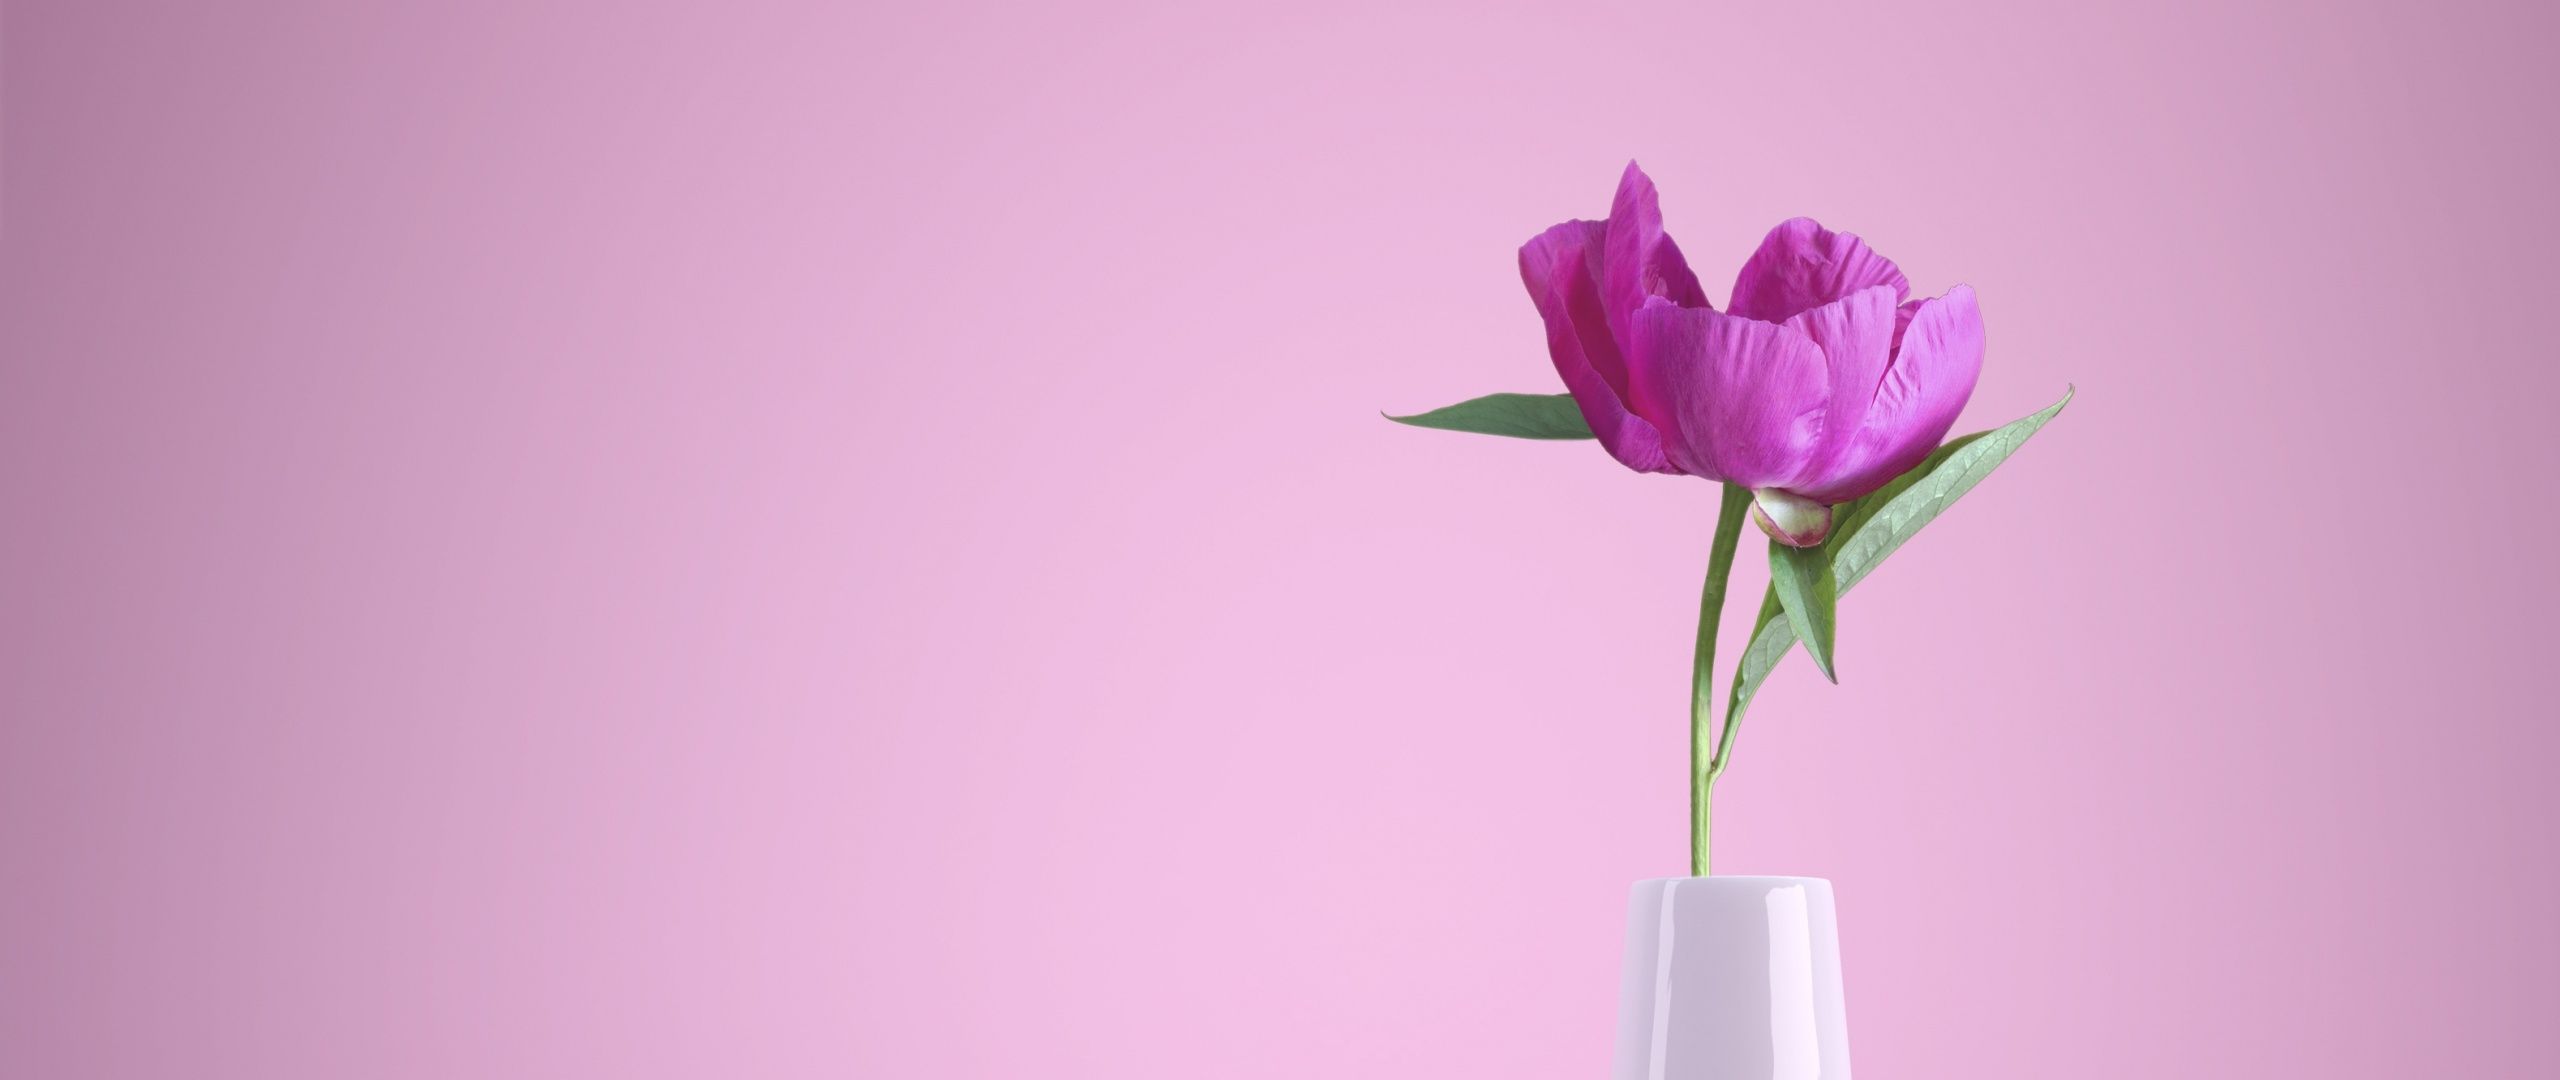 A purple flower in a white vase against a pink background - Soft pink